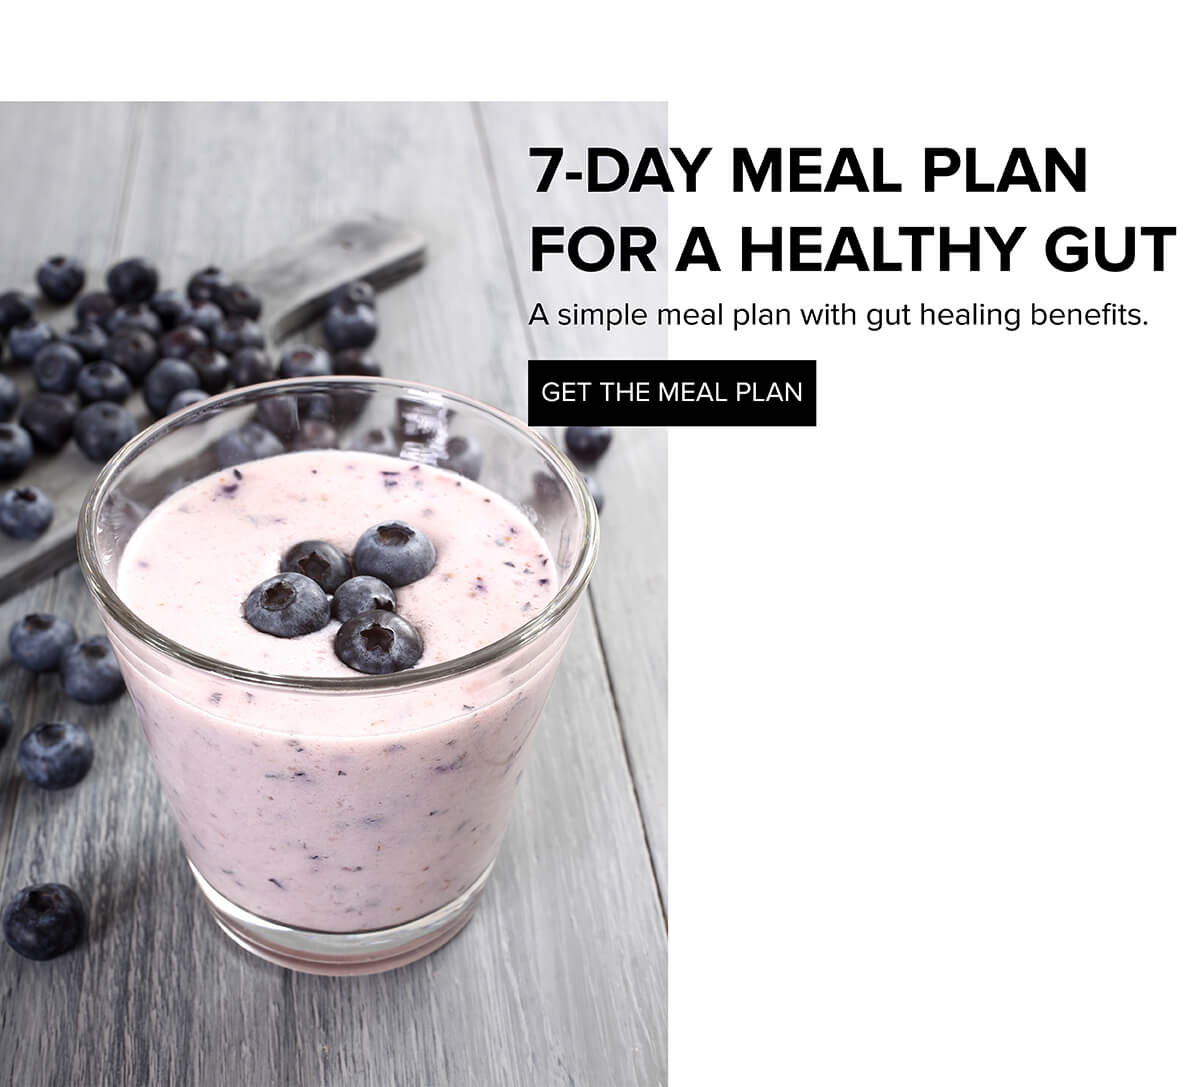 7-day meal plan for a healthy gut